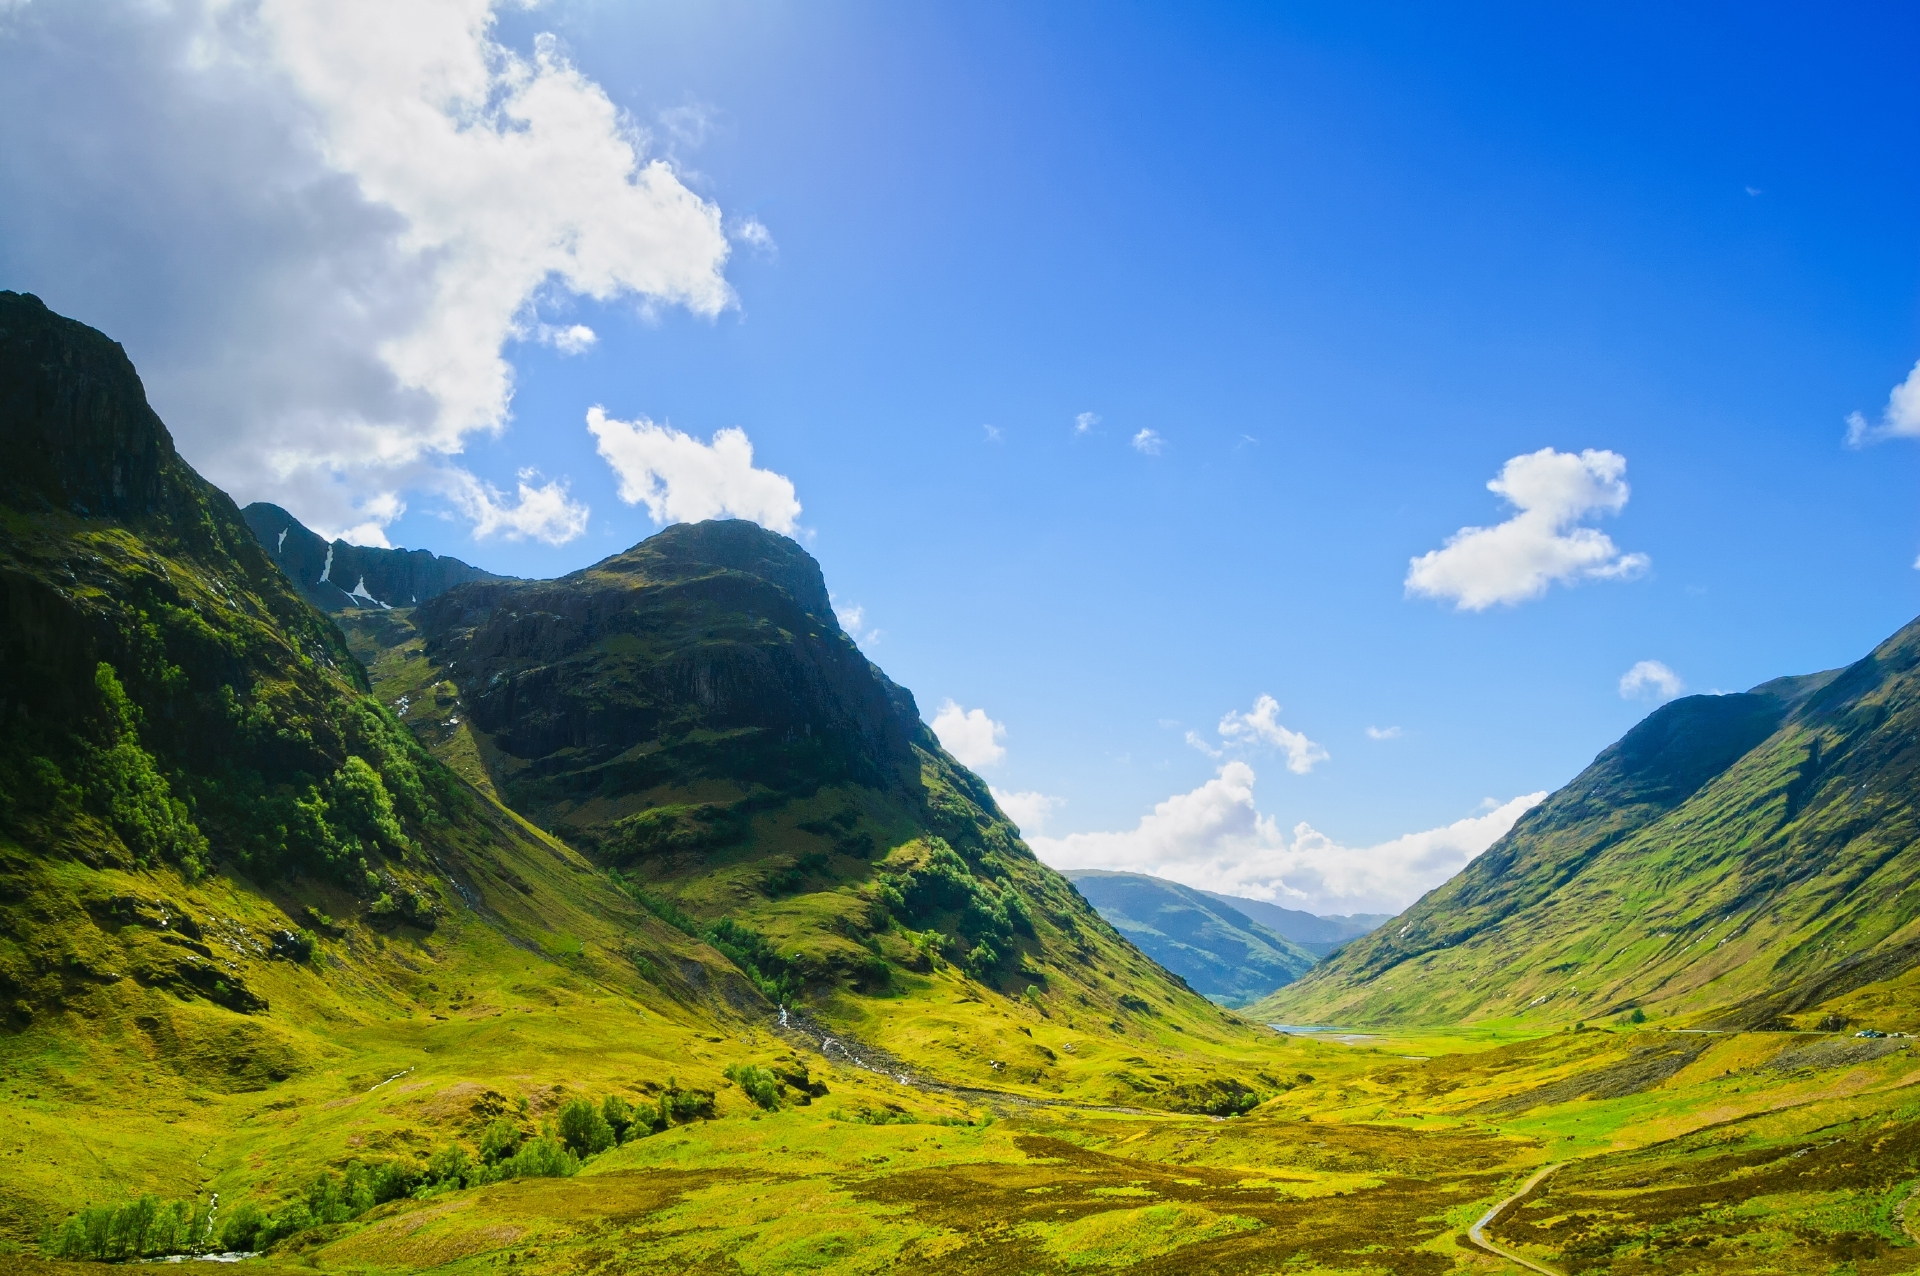 Glencoe features in the Harry Potter films